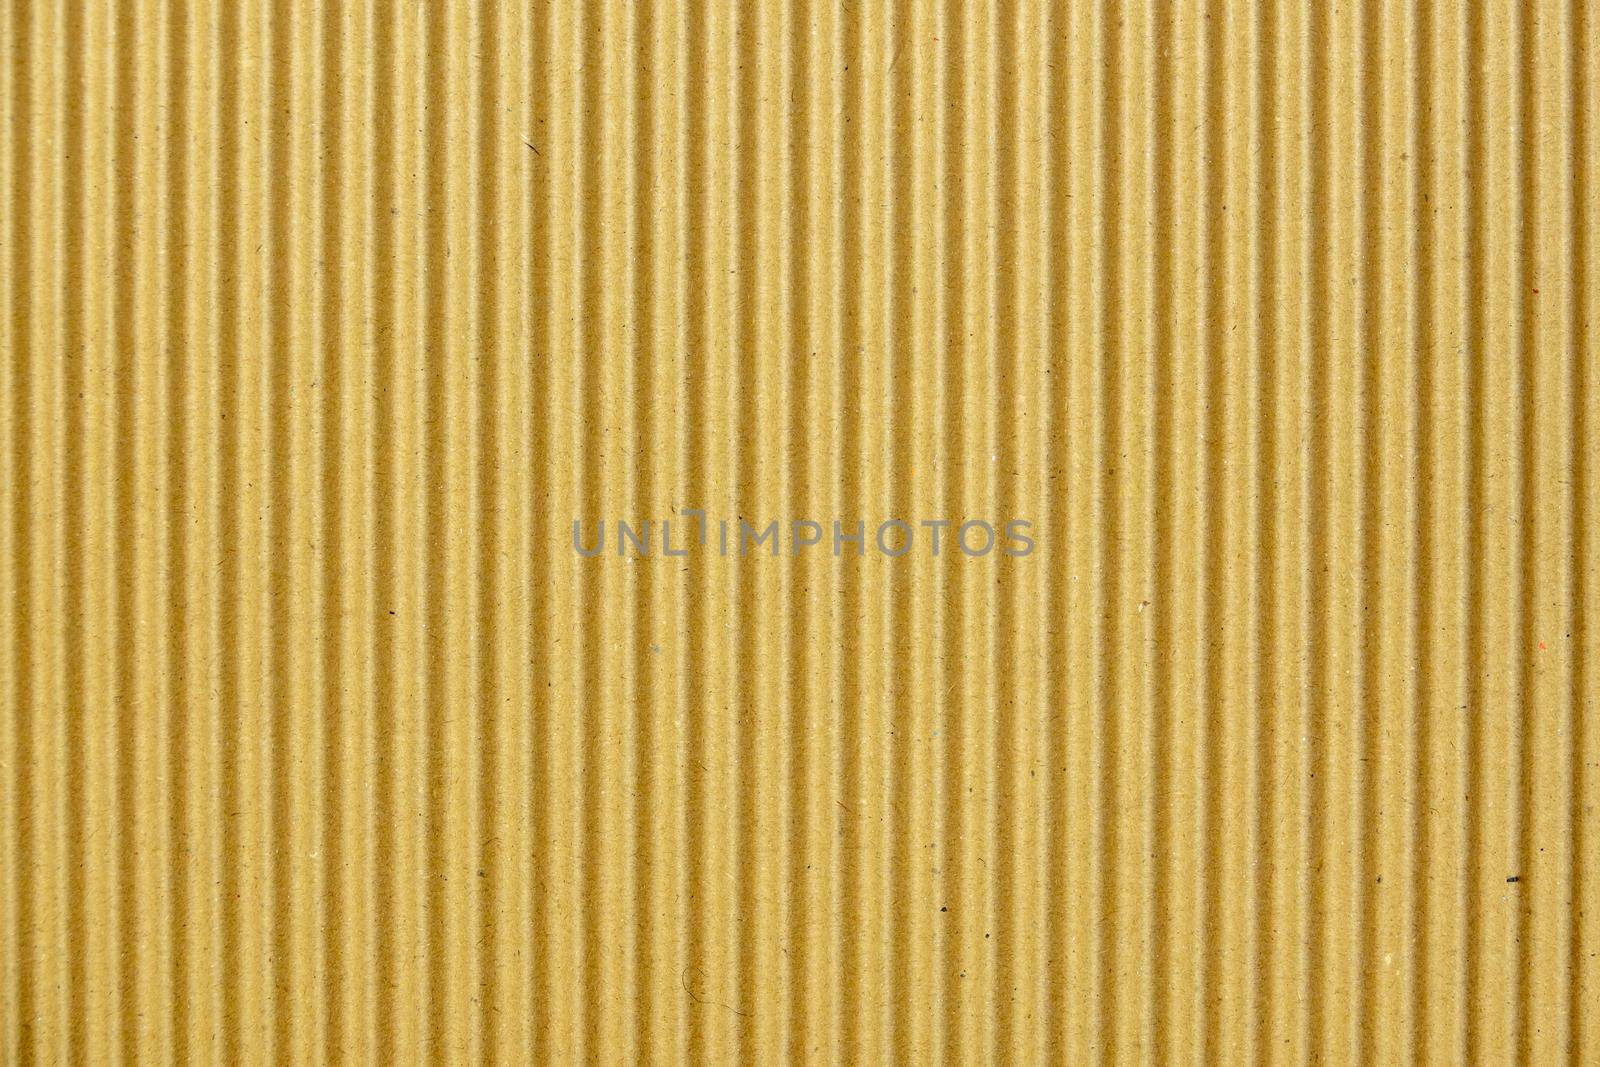 Background Texture Of Corrugated Cardboard For Packaging